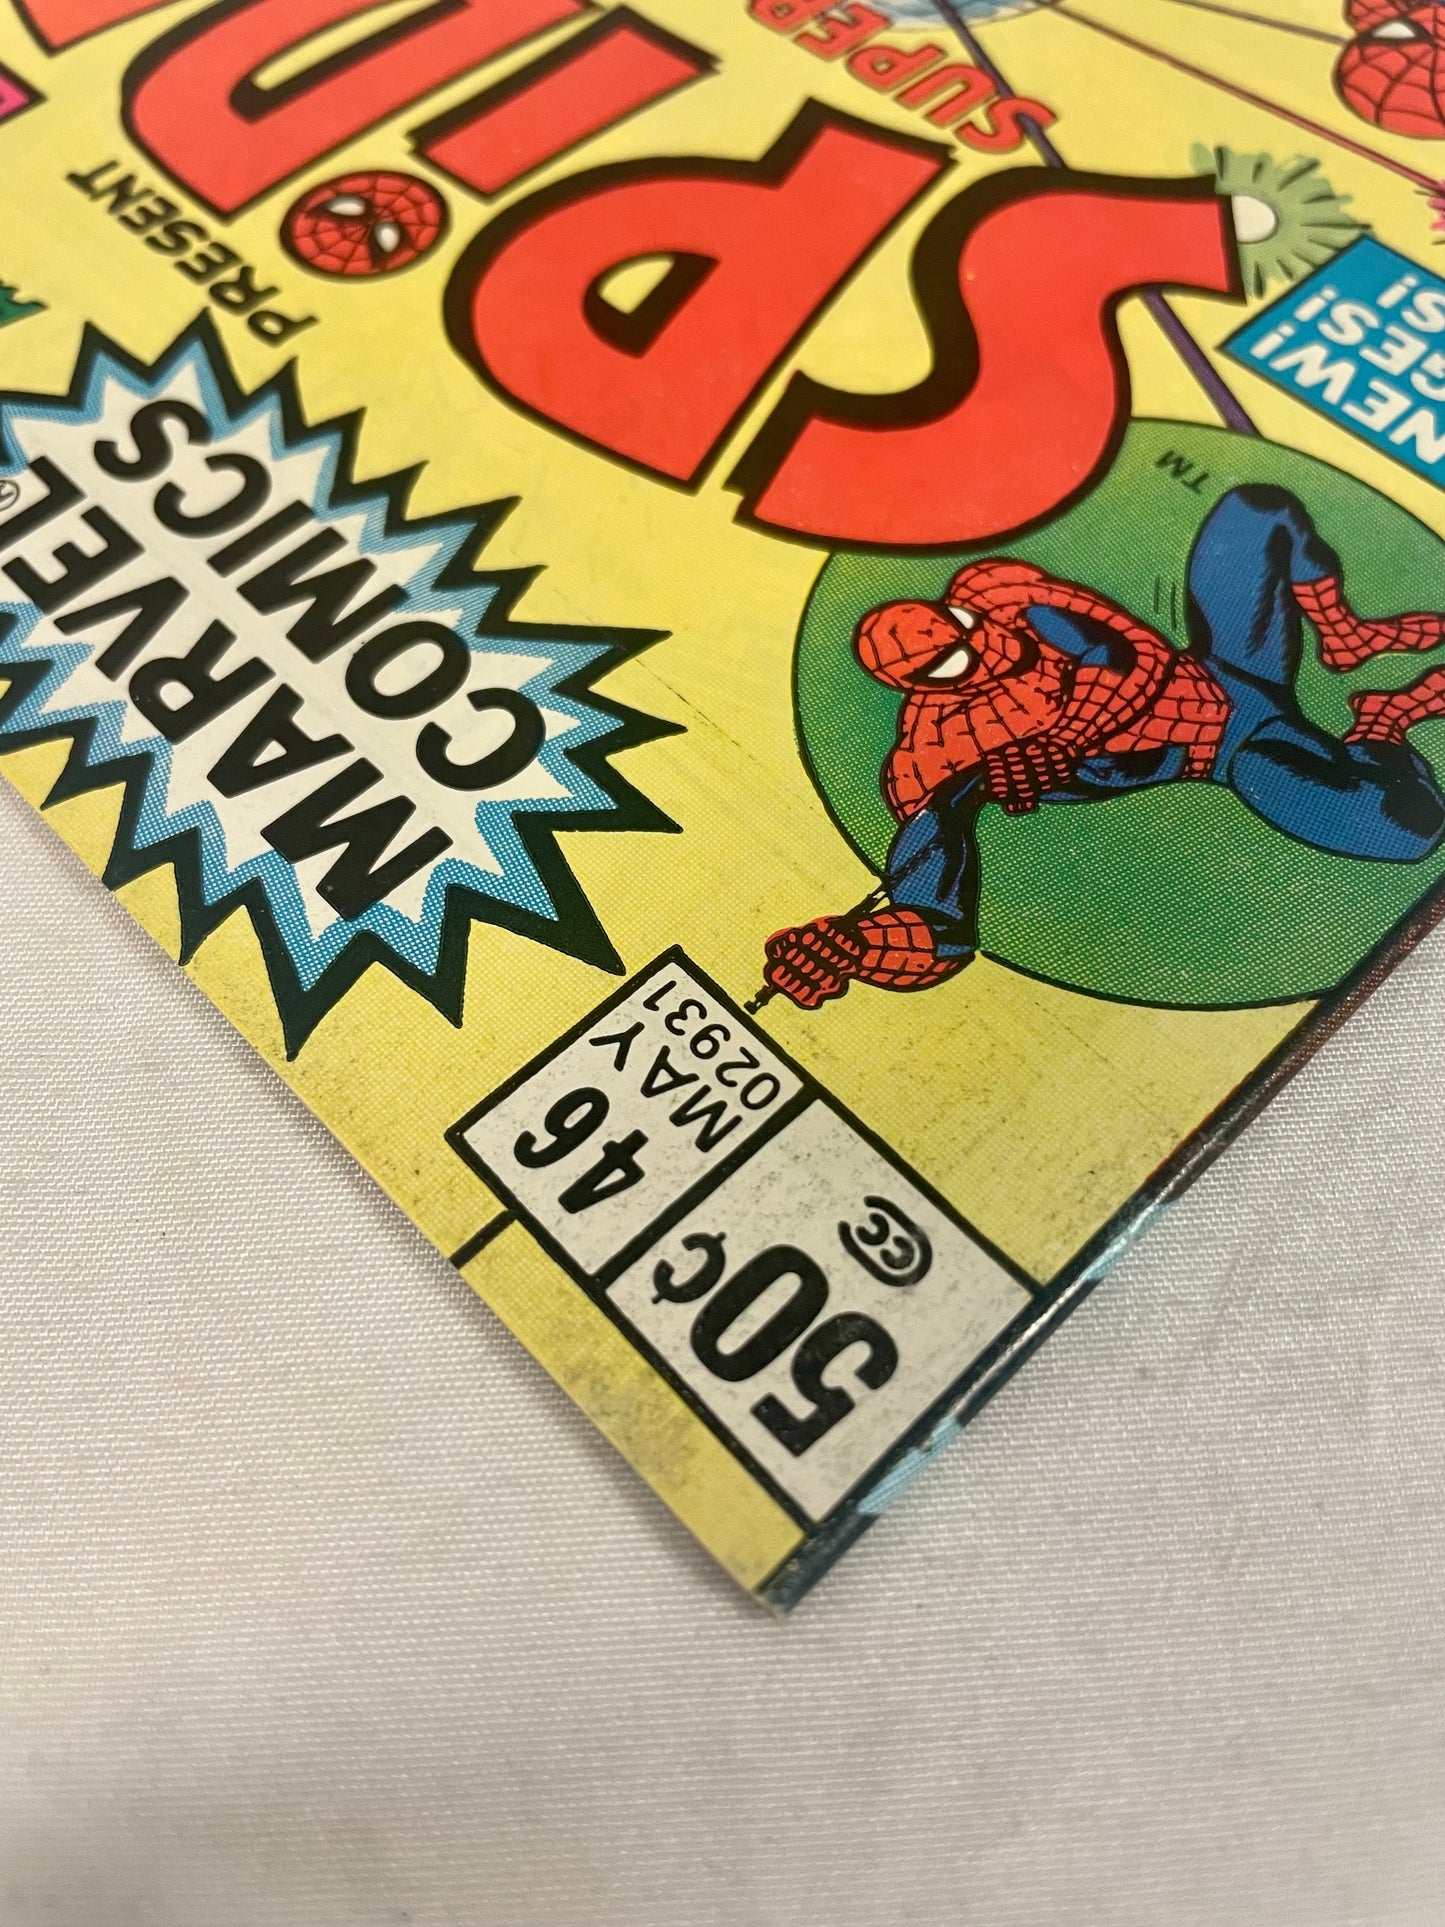 Marvel Comics And The Electric Company Presents Spidey Super Stories #46